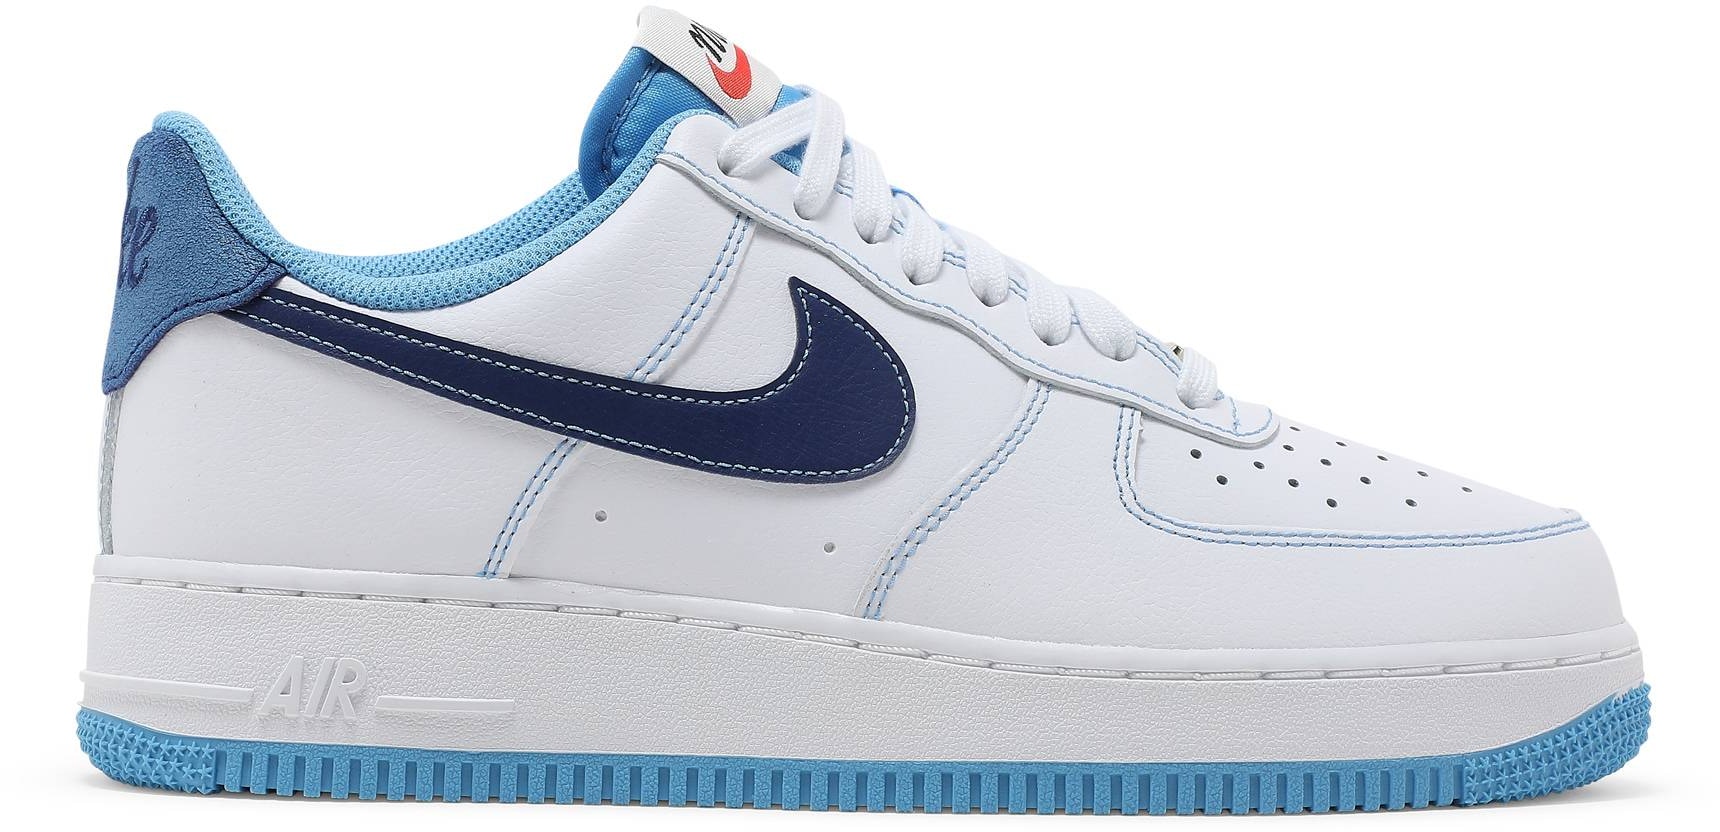 nike-air-force-1-low-first-use-pack-white-university-blue-da8478